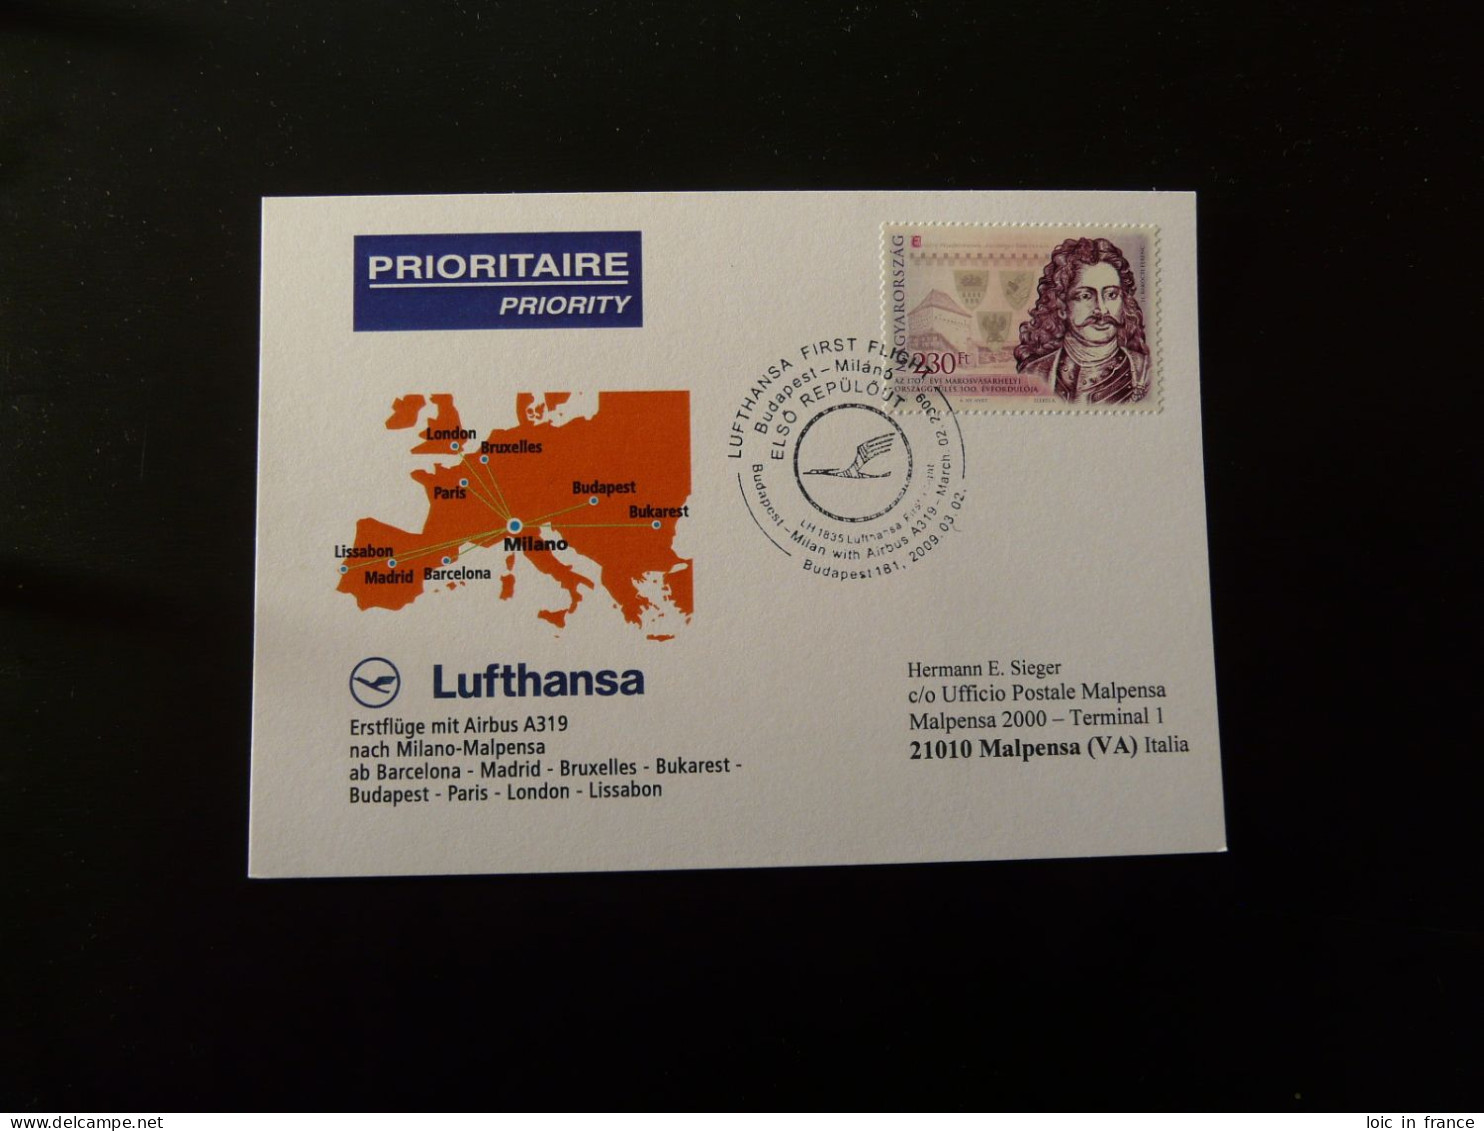 Premier Vol First Flight Budapest To Milano Malpensa Airbus A319 Lufthansa 2009 - Covers & Documents